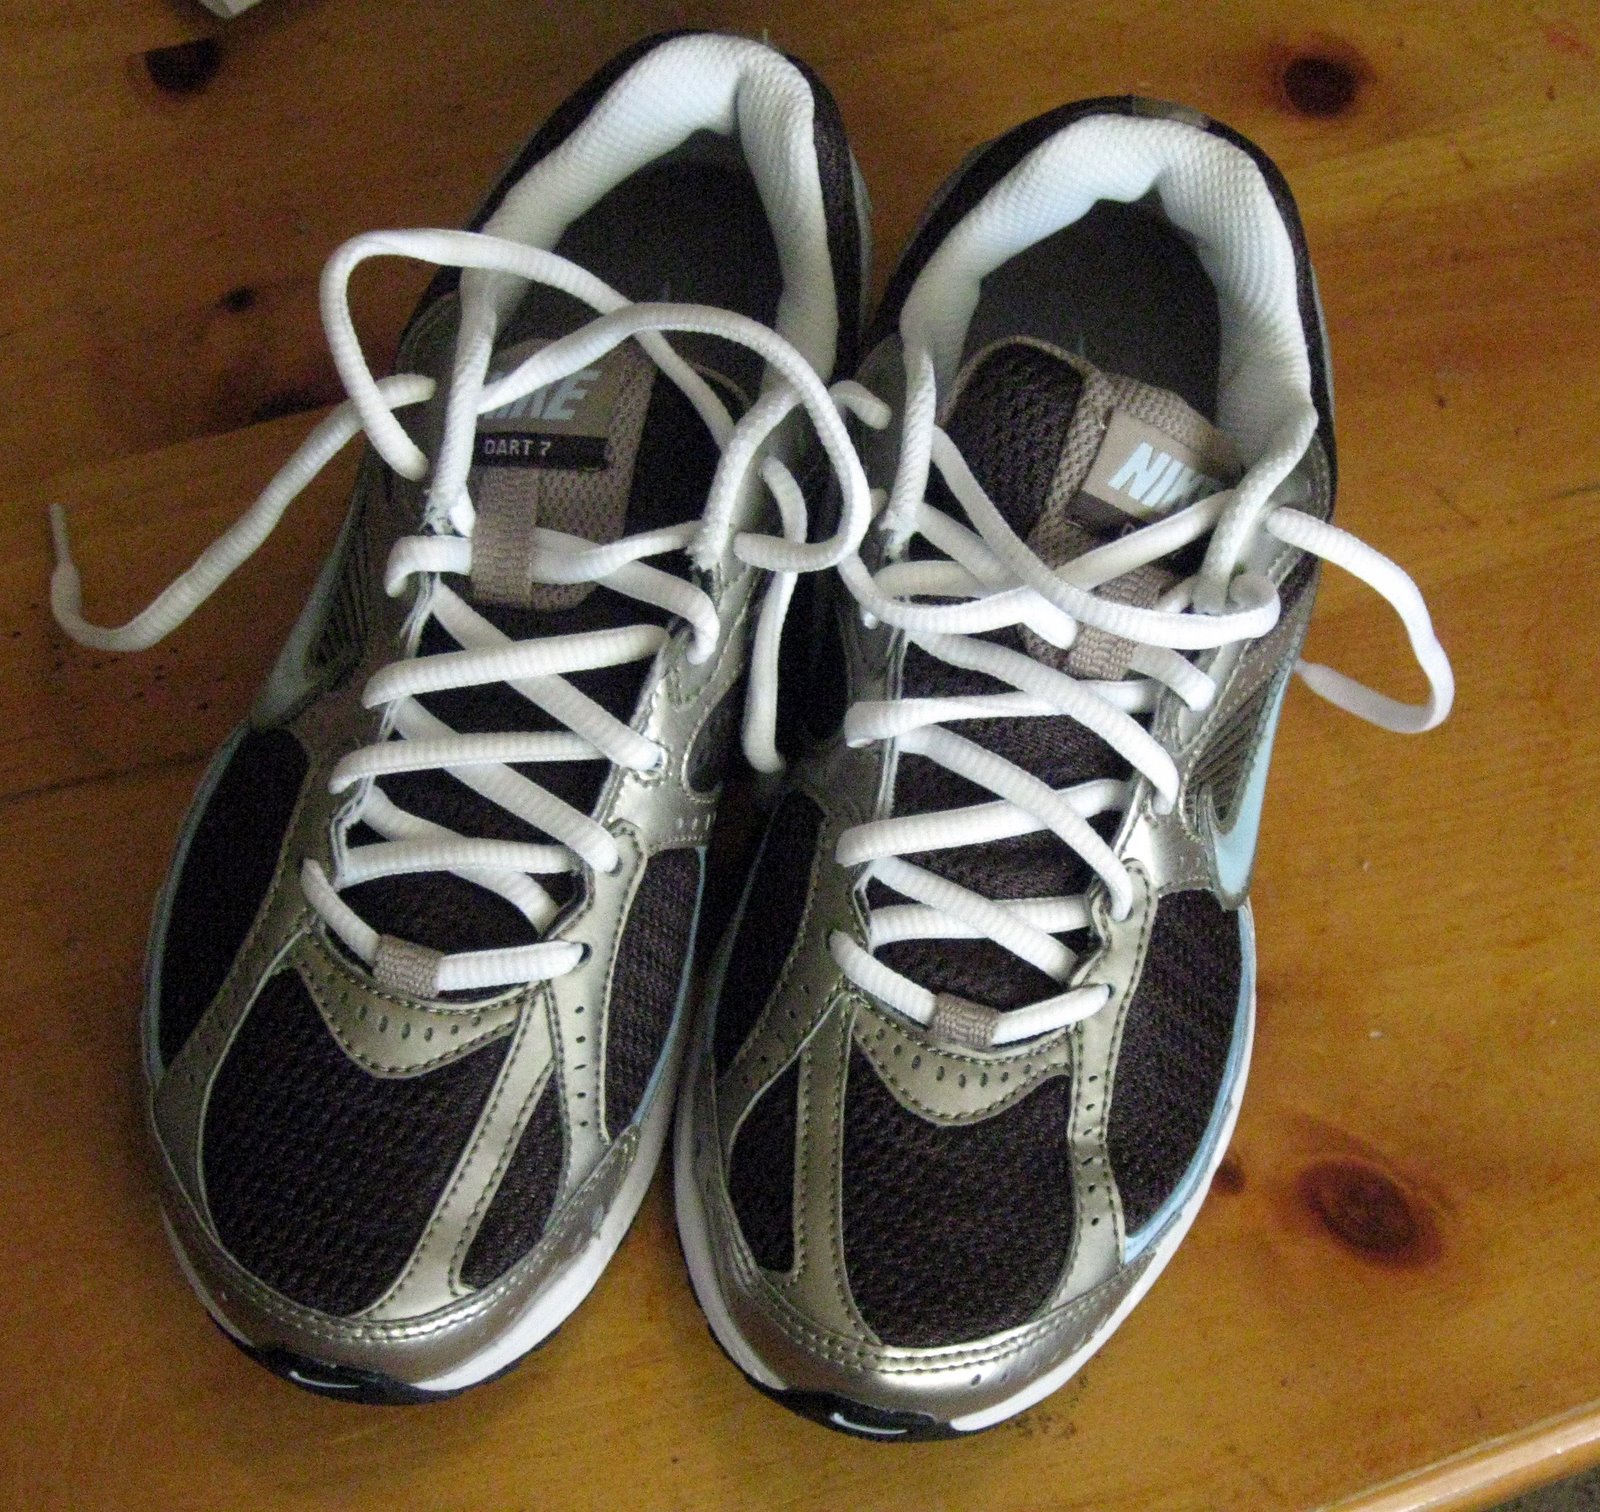 White Trash Mama: Running shoes are ugly